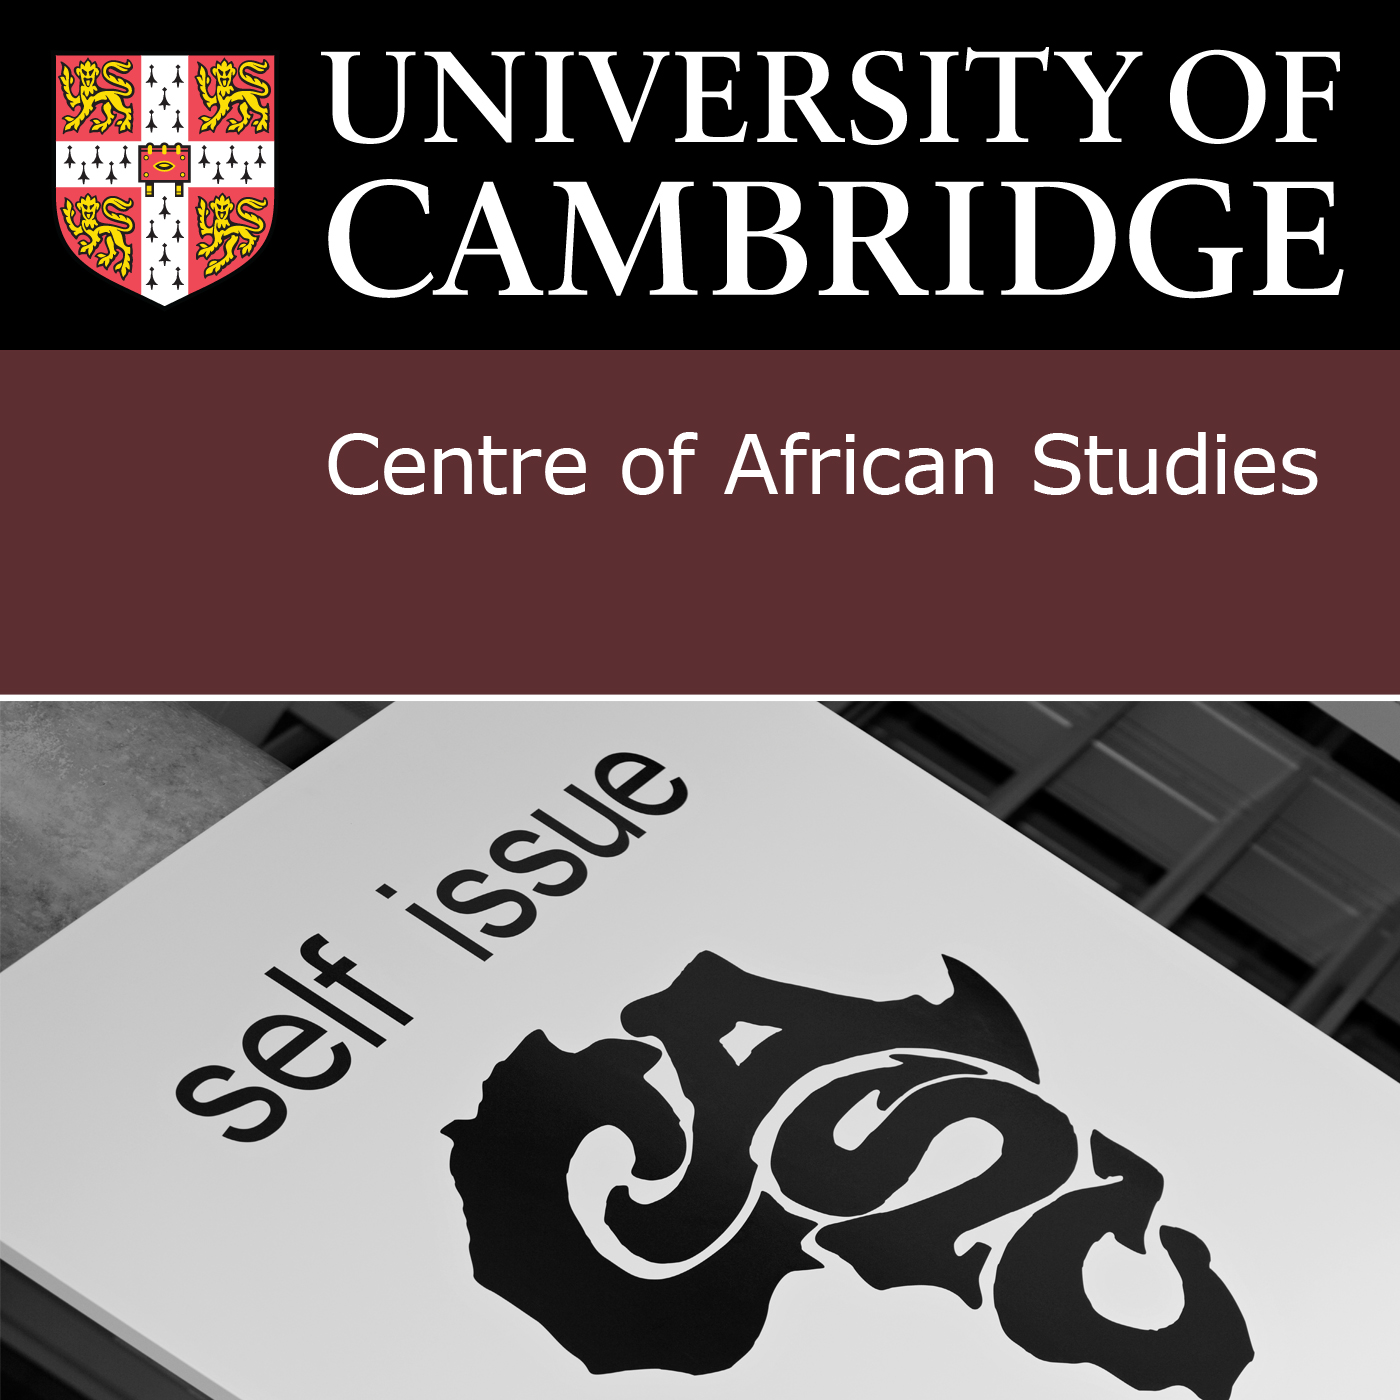 Centre of African Studies's image